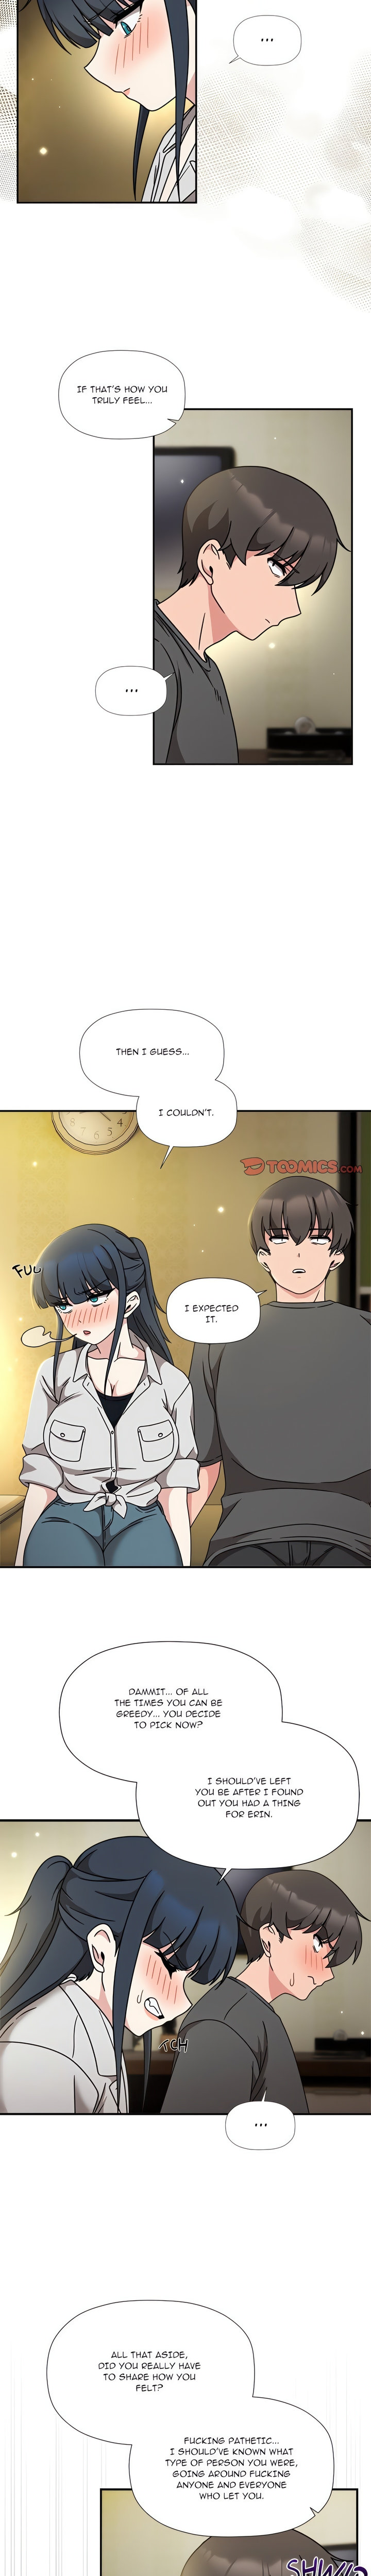 #Follow Me Chapter 58 - Page 5